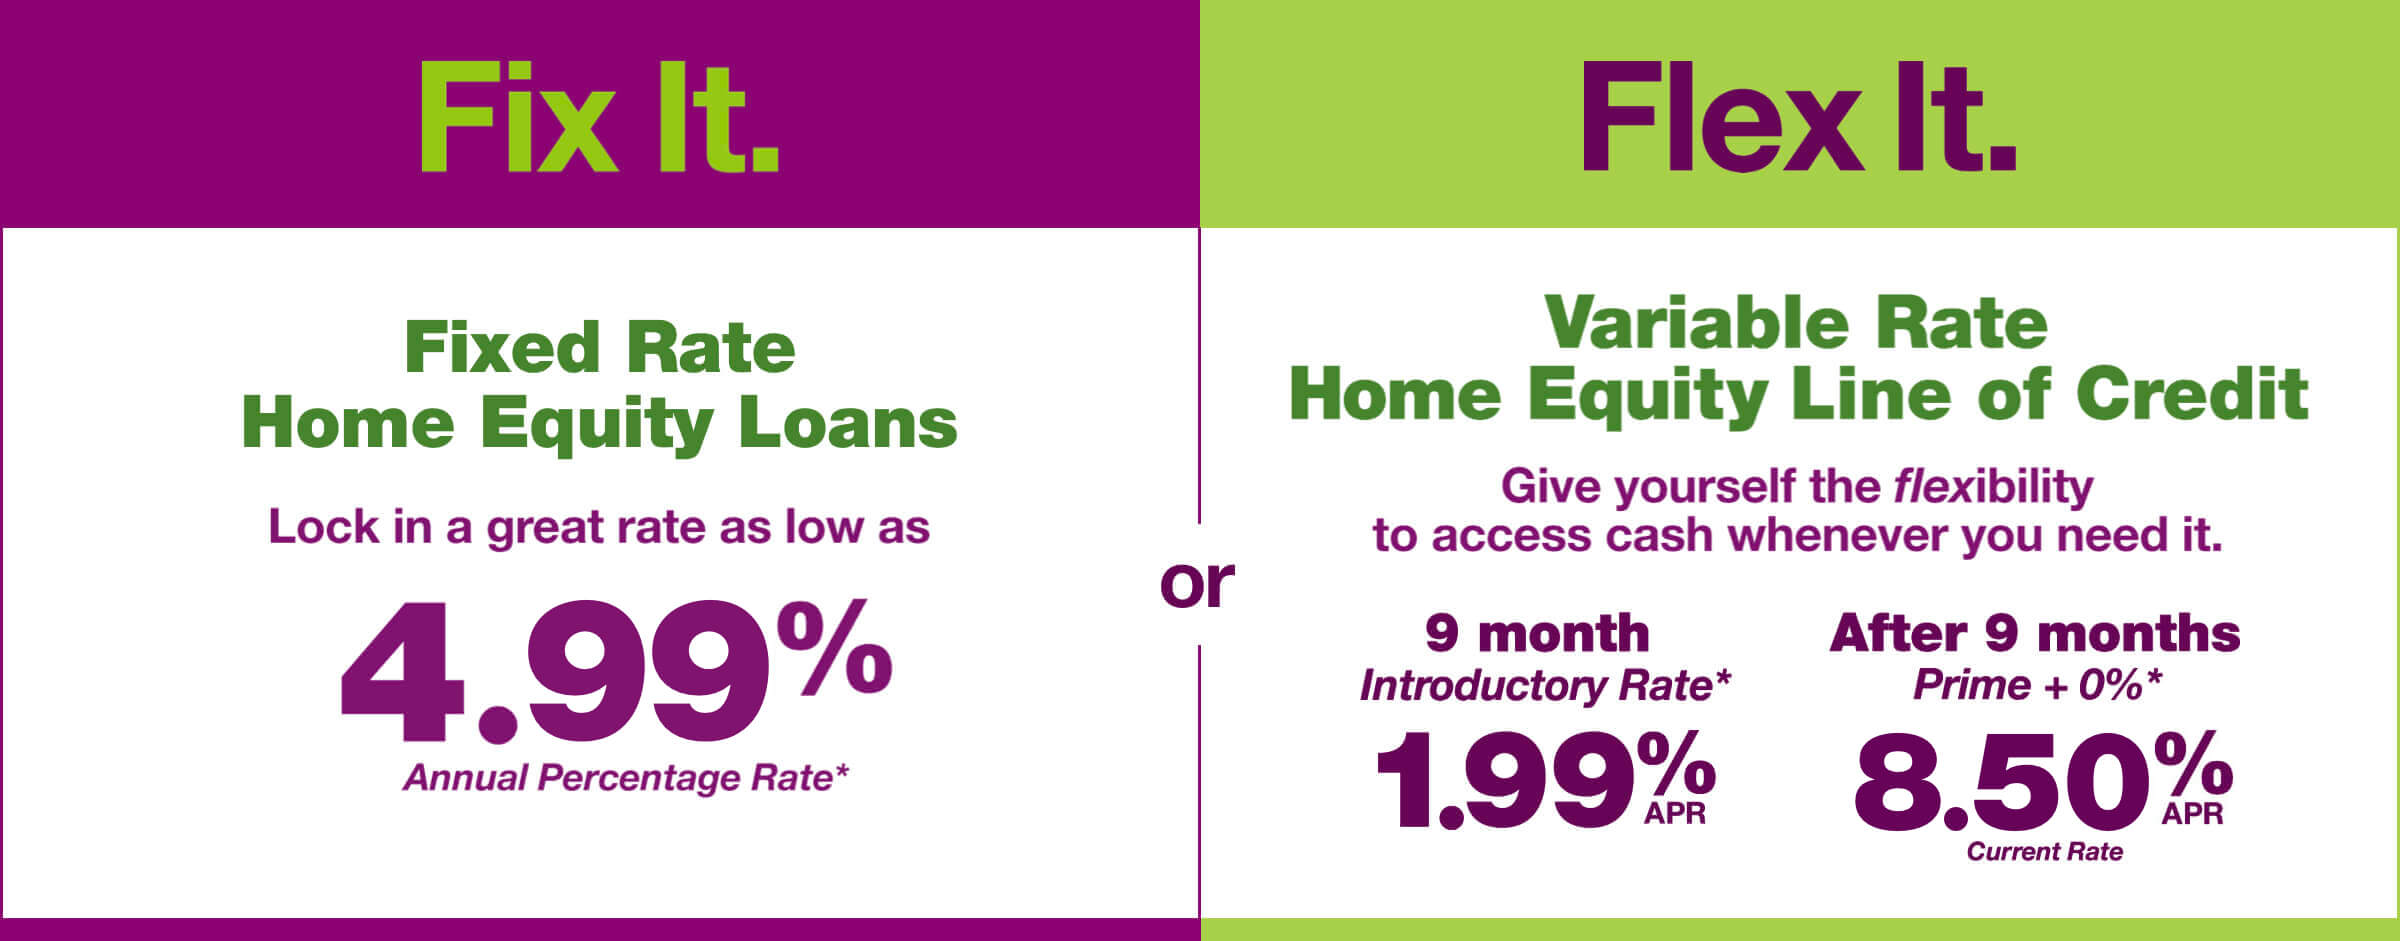 Home Equity Line of Credit and Home Equity Loan Promo